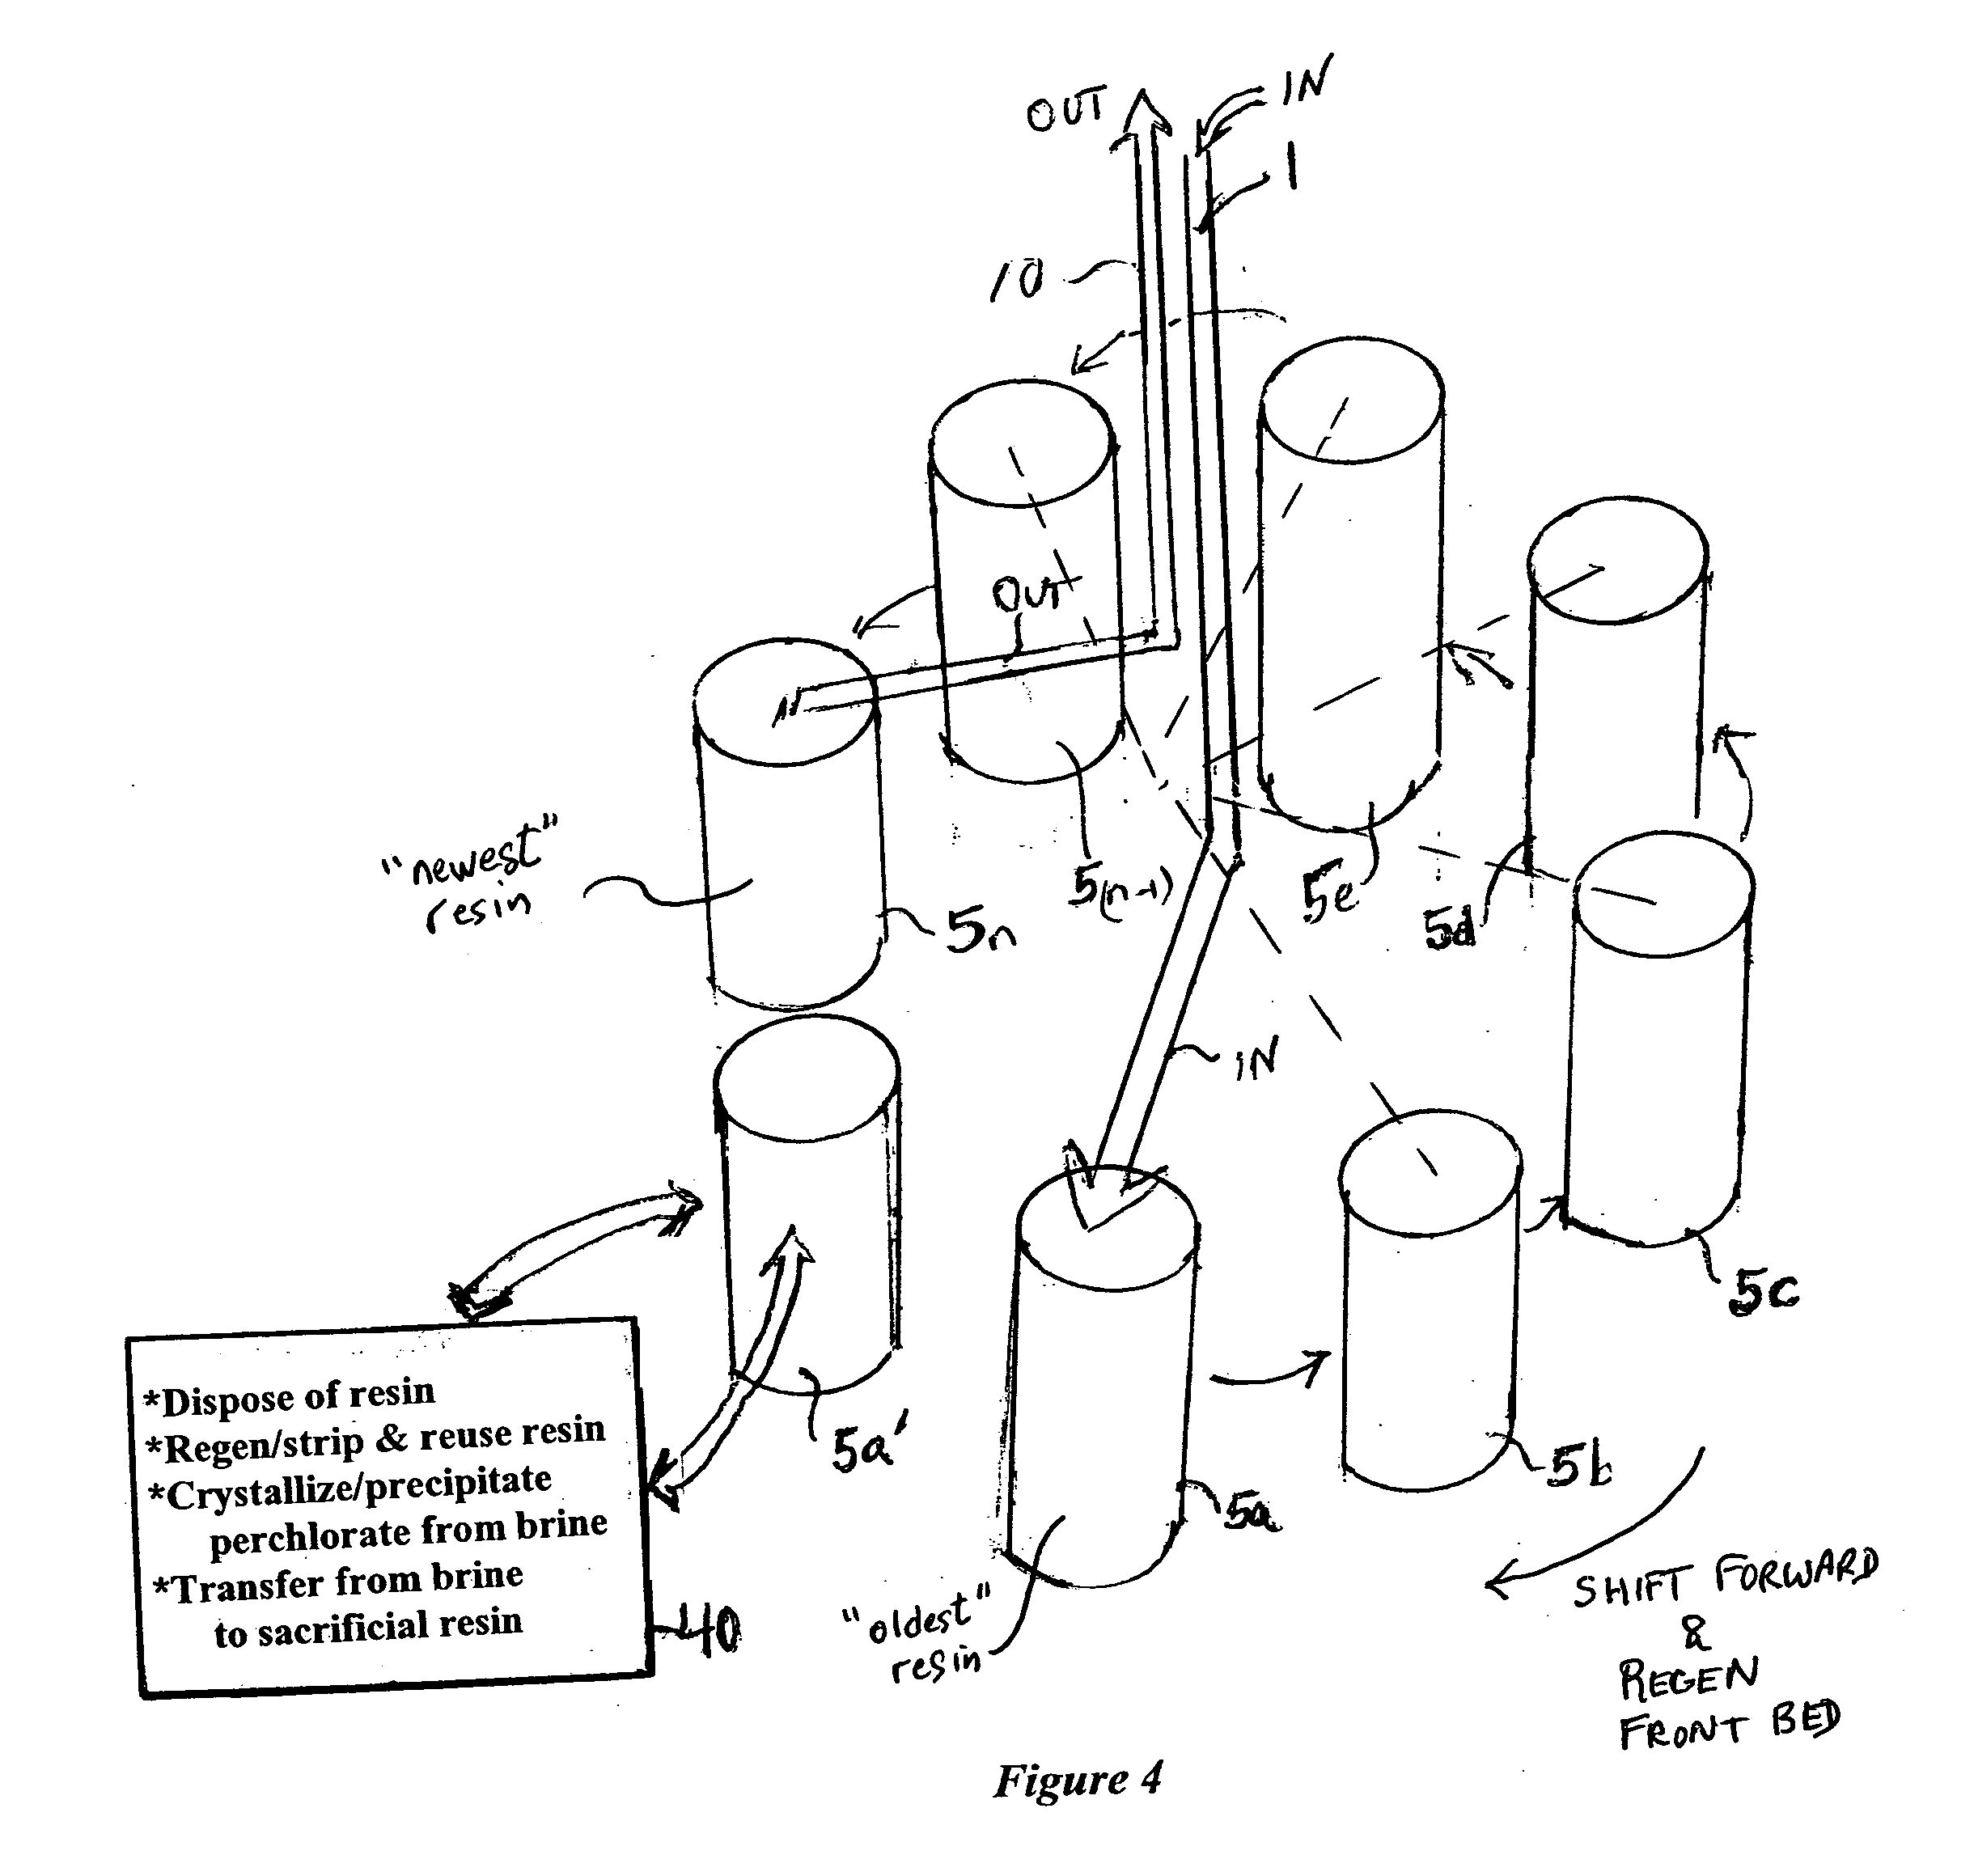 Water treatment/remediation system